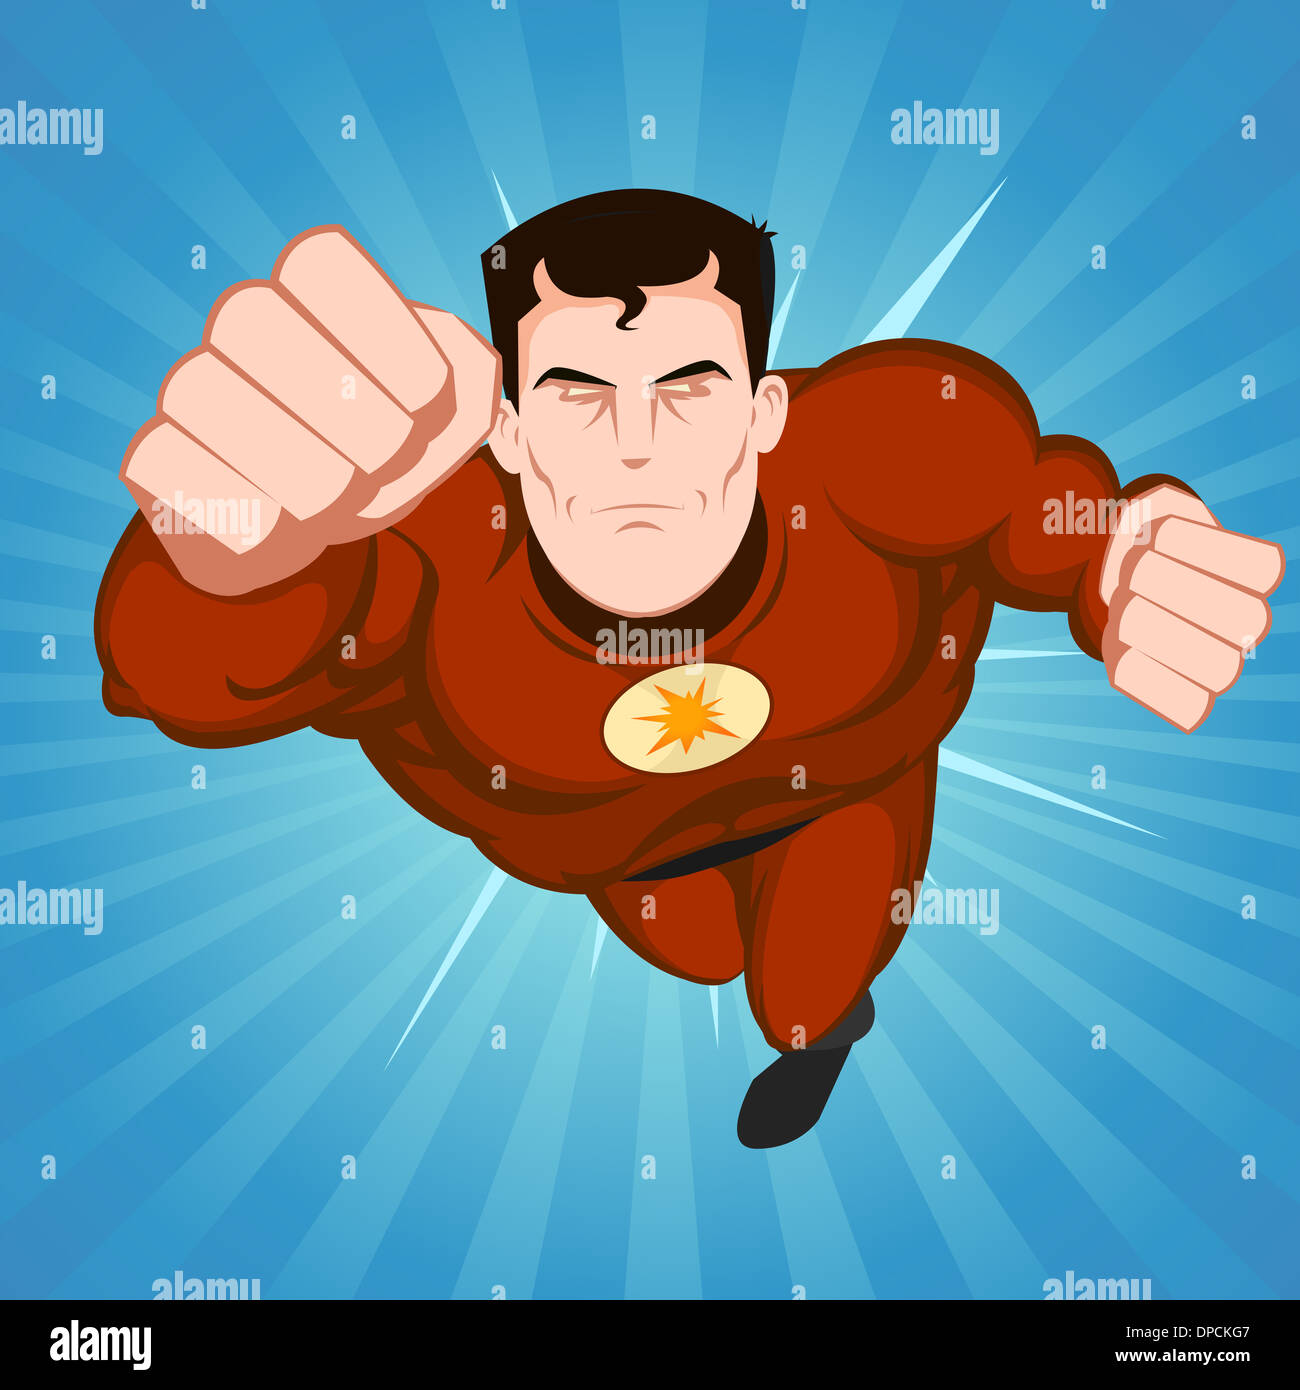 Illustration of a flying comic superhero character with red disguise on a  blue beams background Stock Photo - Alamy